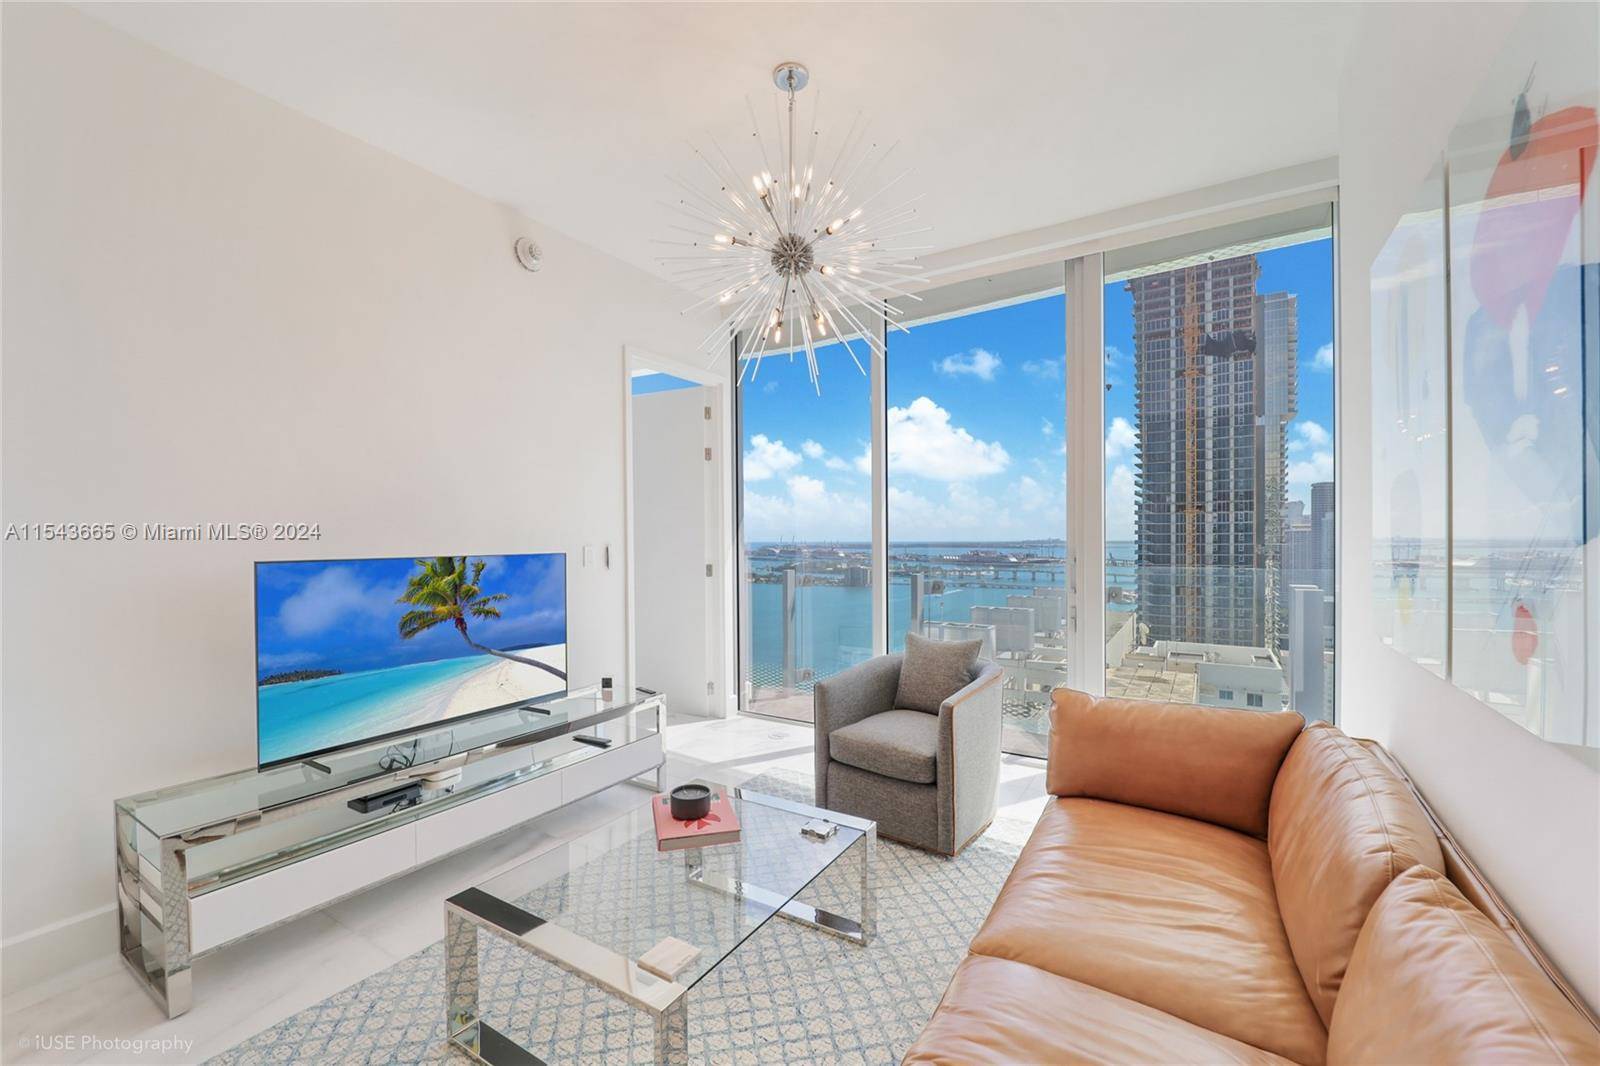 Experience luxury living at its finest in Unit 3204 at MISSONI Residences, where breathtaking, unobstructed views of Biscayne Bay and the Miami skyline await you.